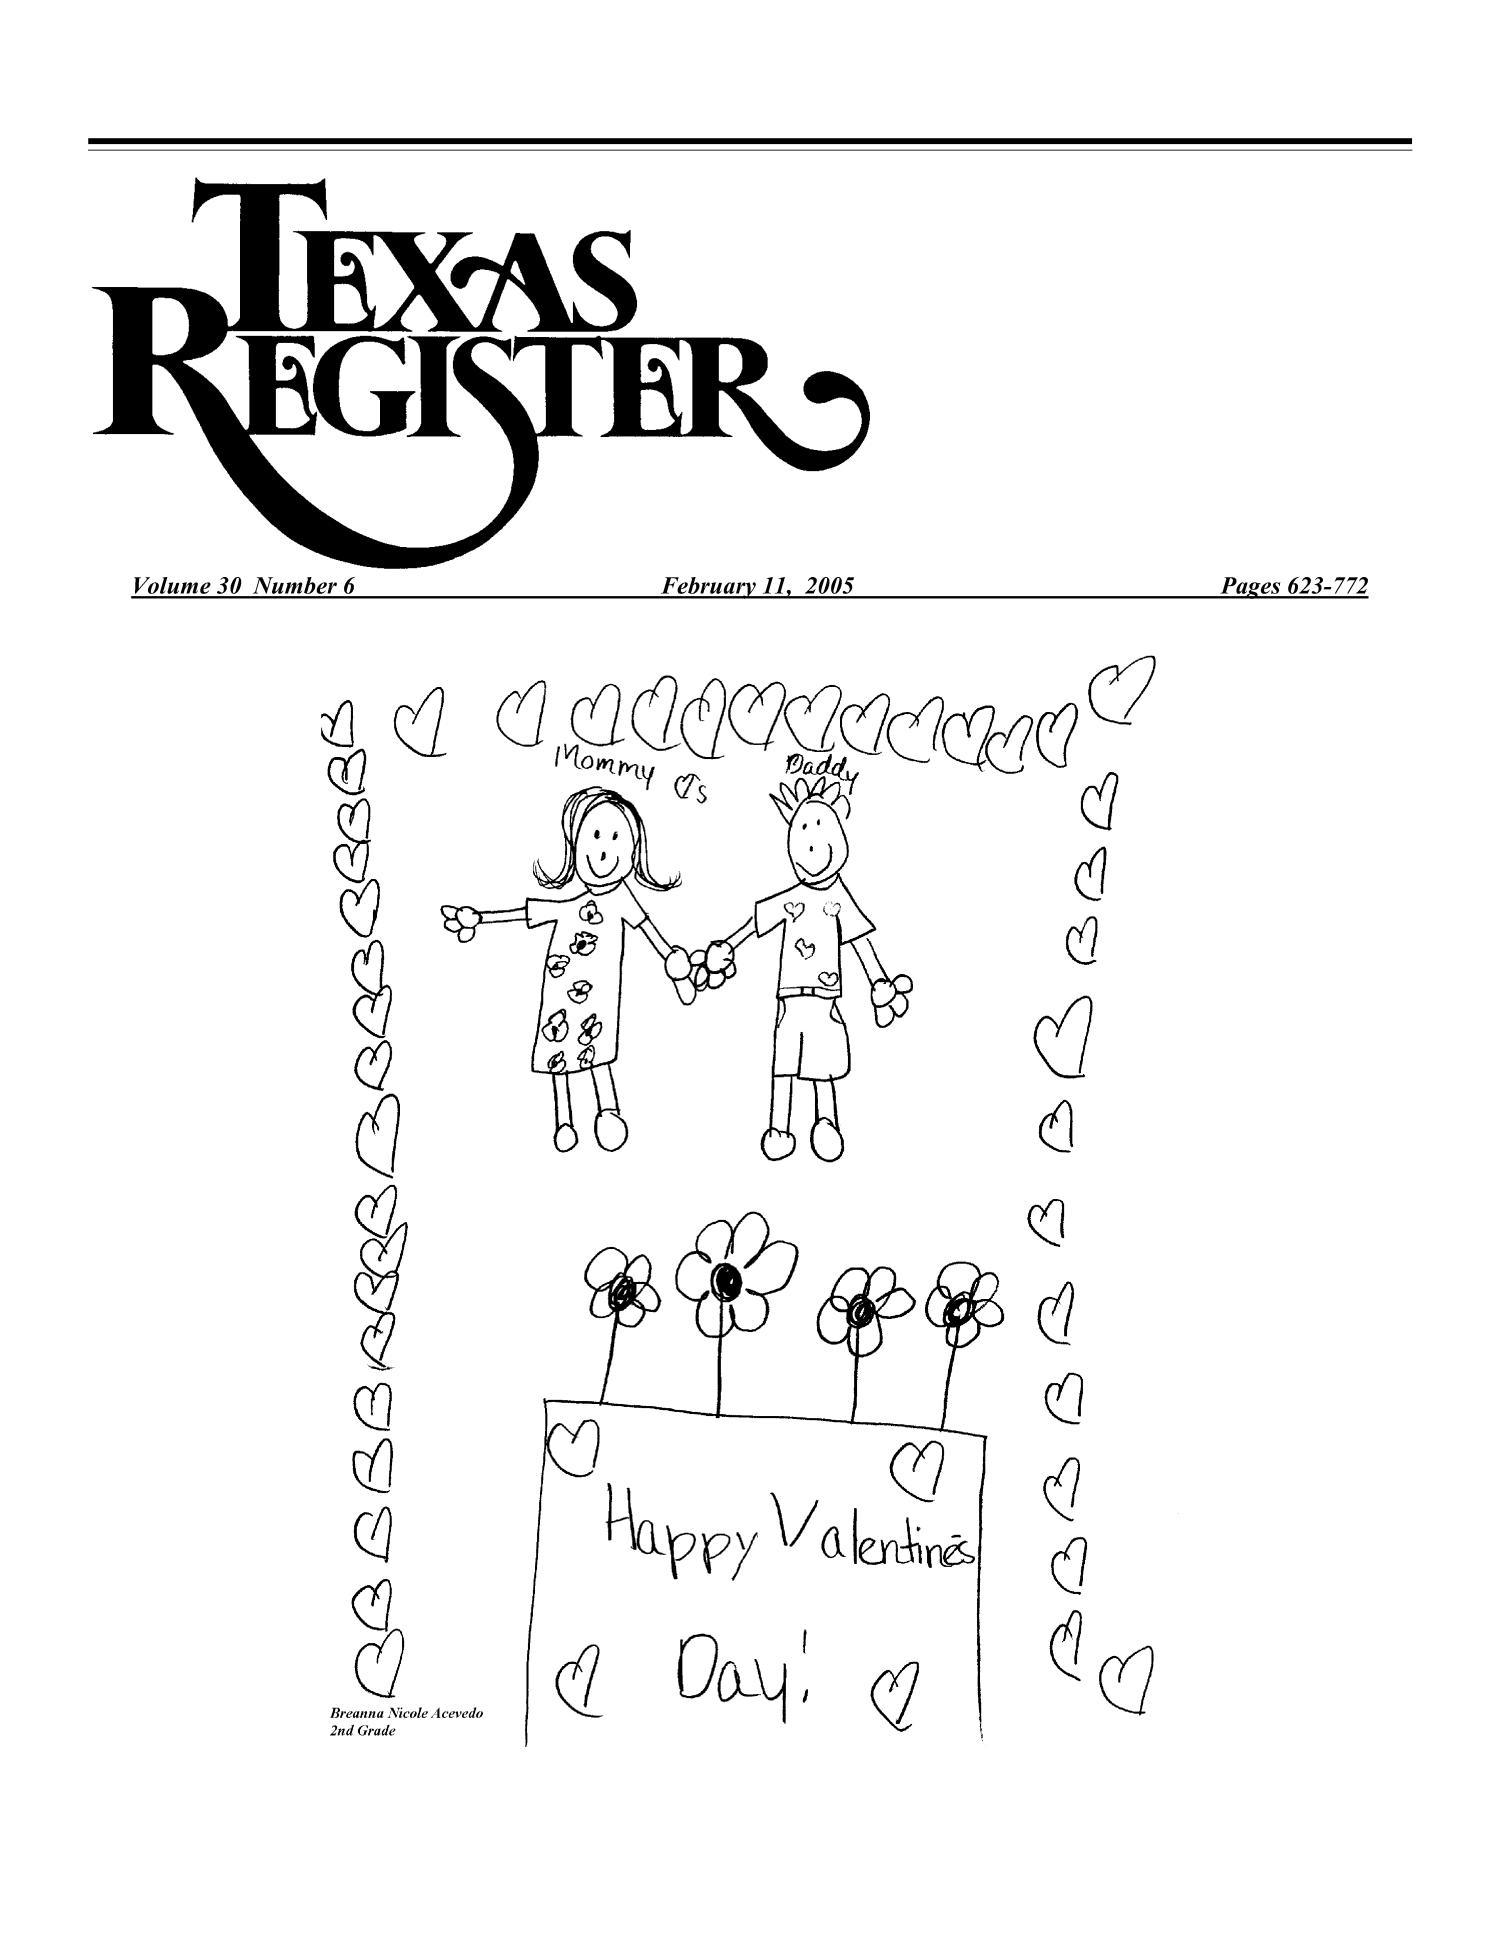 Texas Register, Volume 30, Number 6, Pages 623-772, February 11, 2005
                                                
                                                    623
                                                